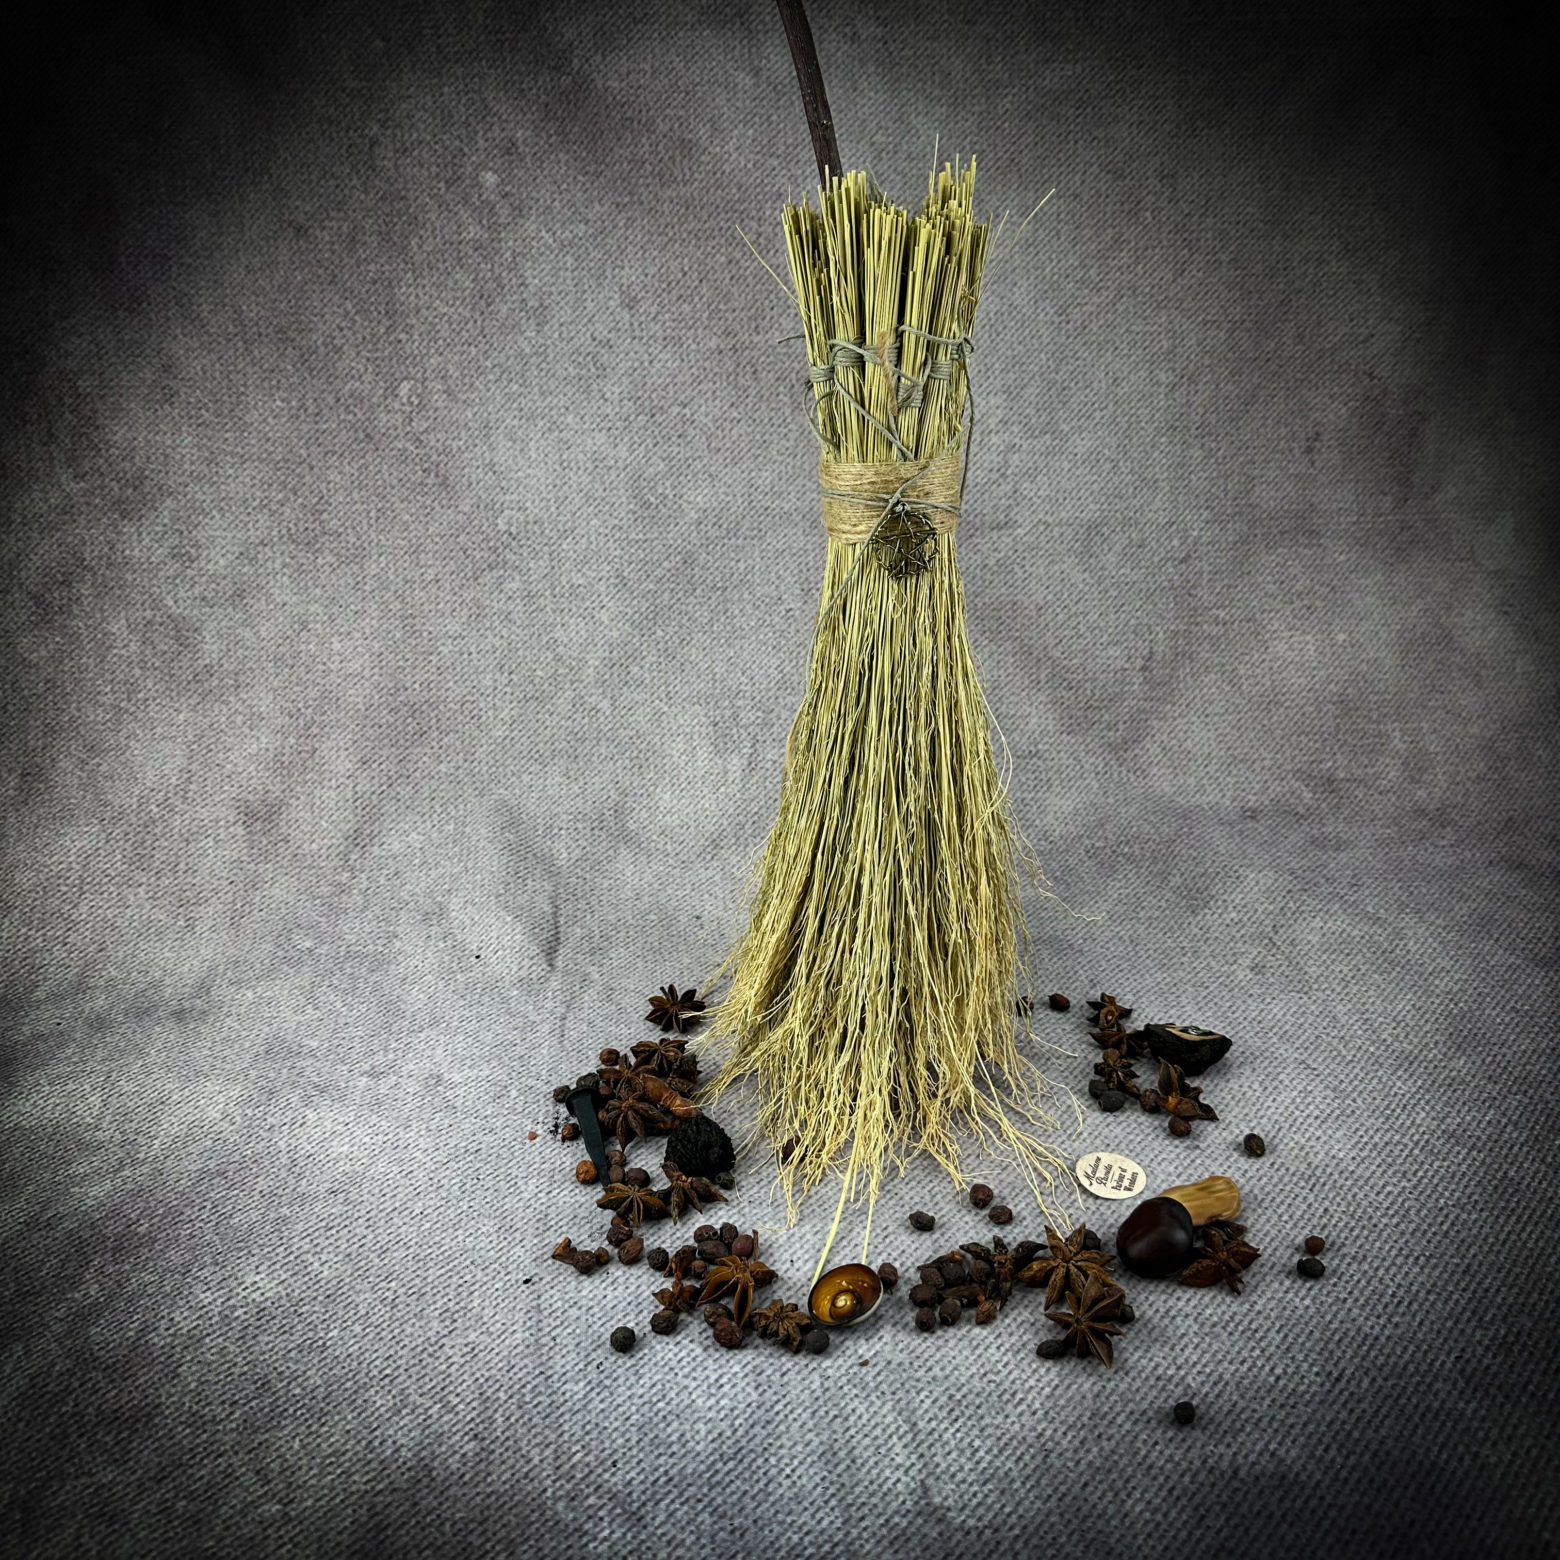 May Scorpio Full Moon Witch Broom Spell Kit and Workshop